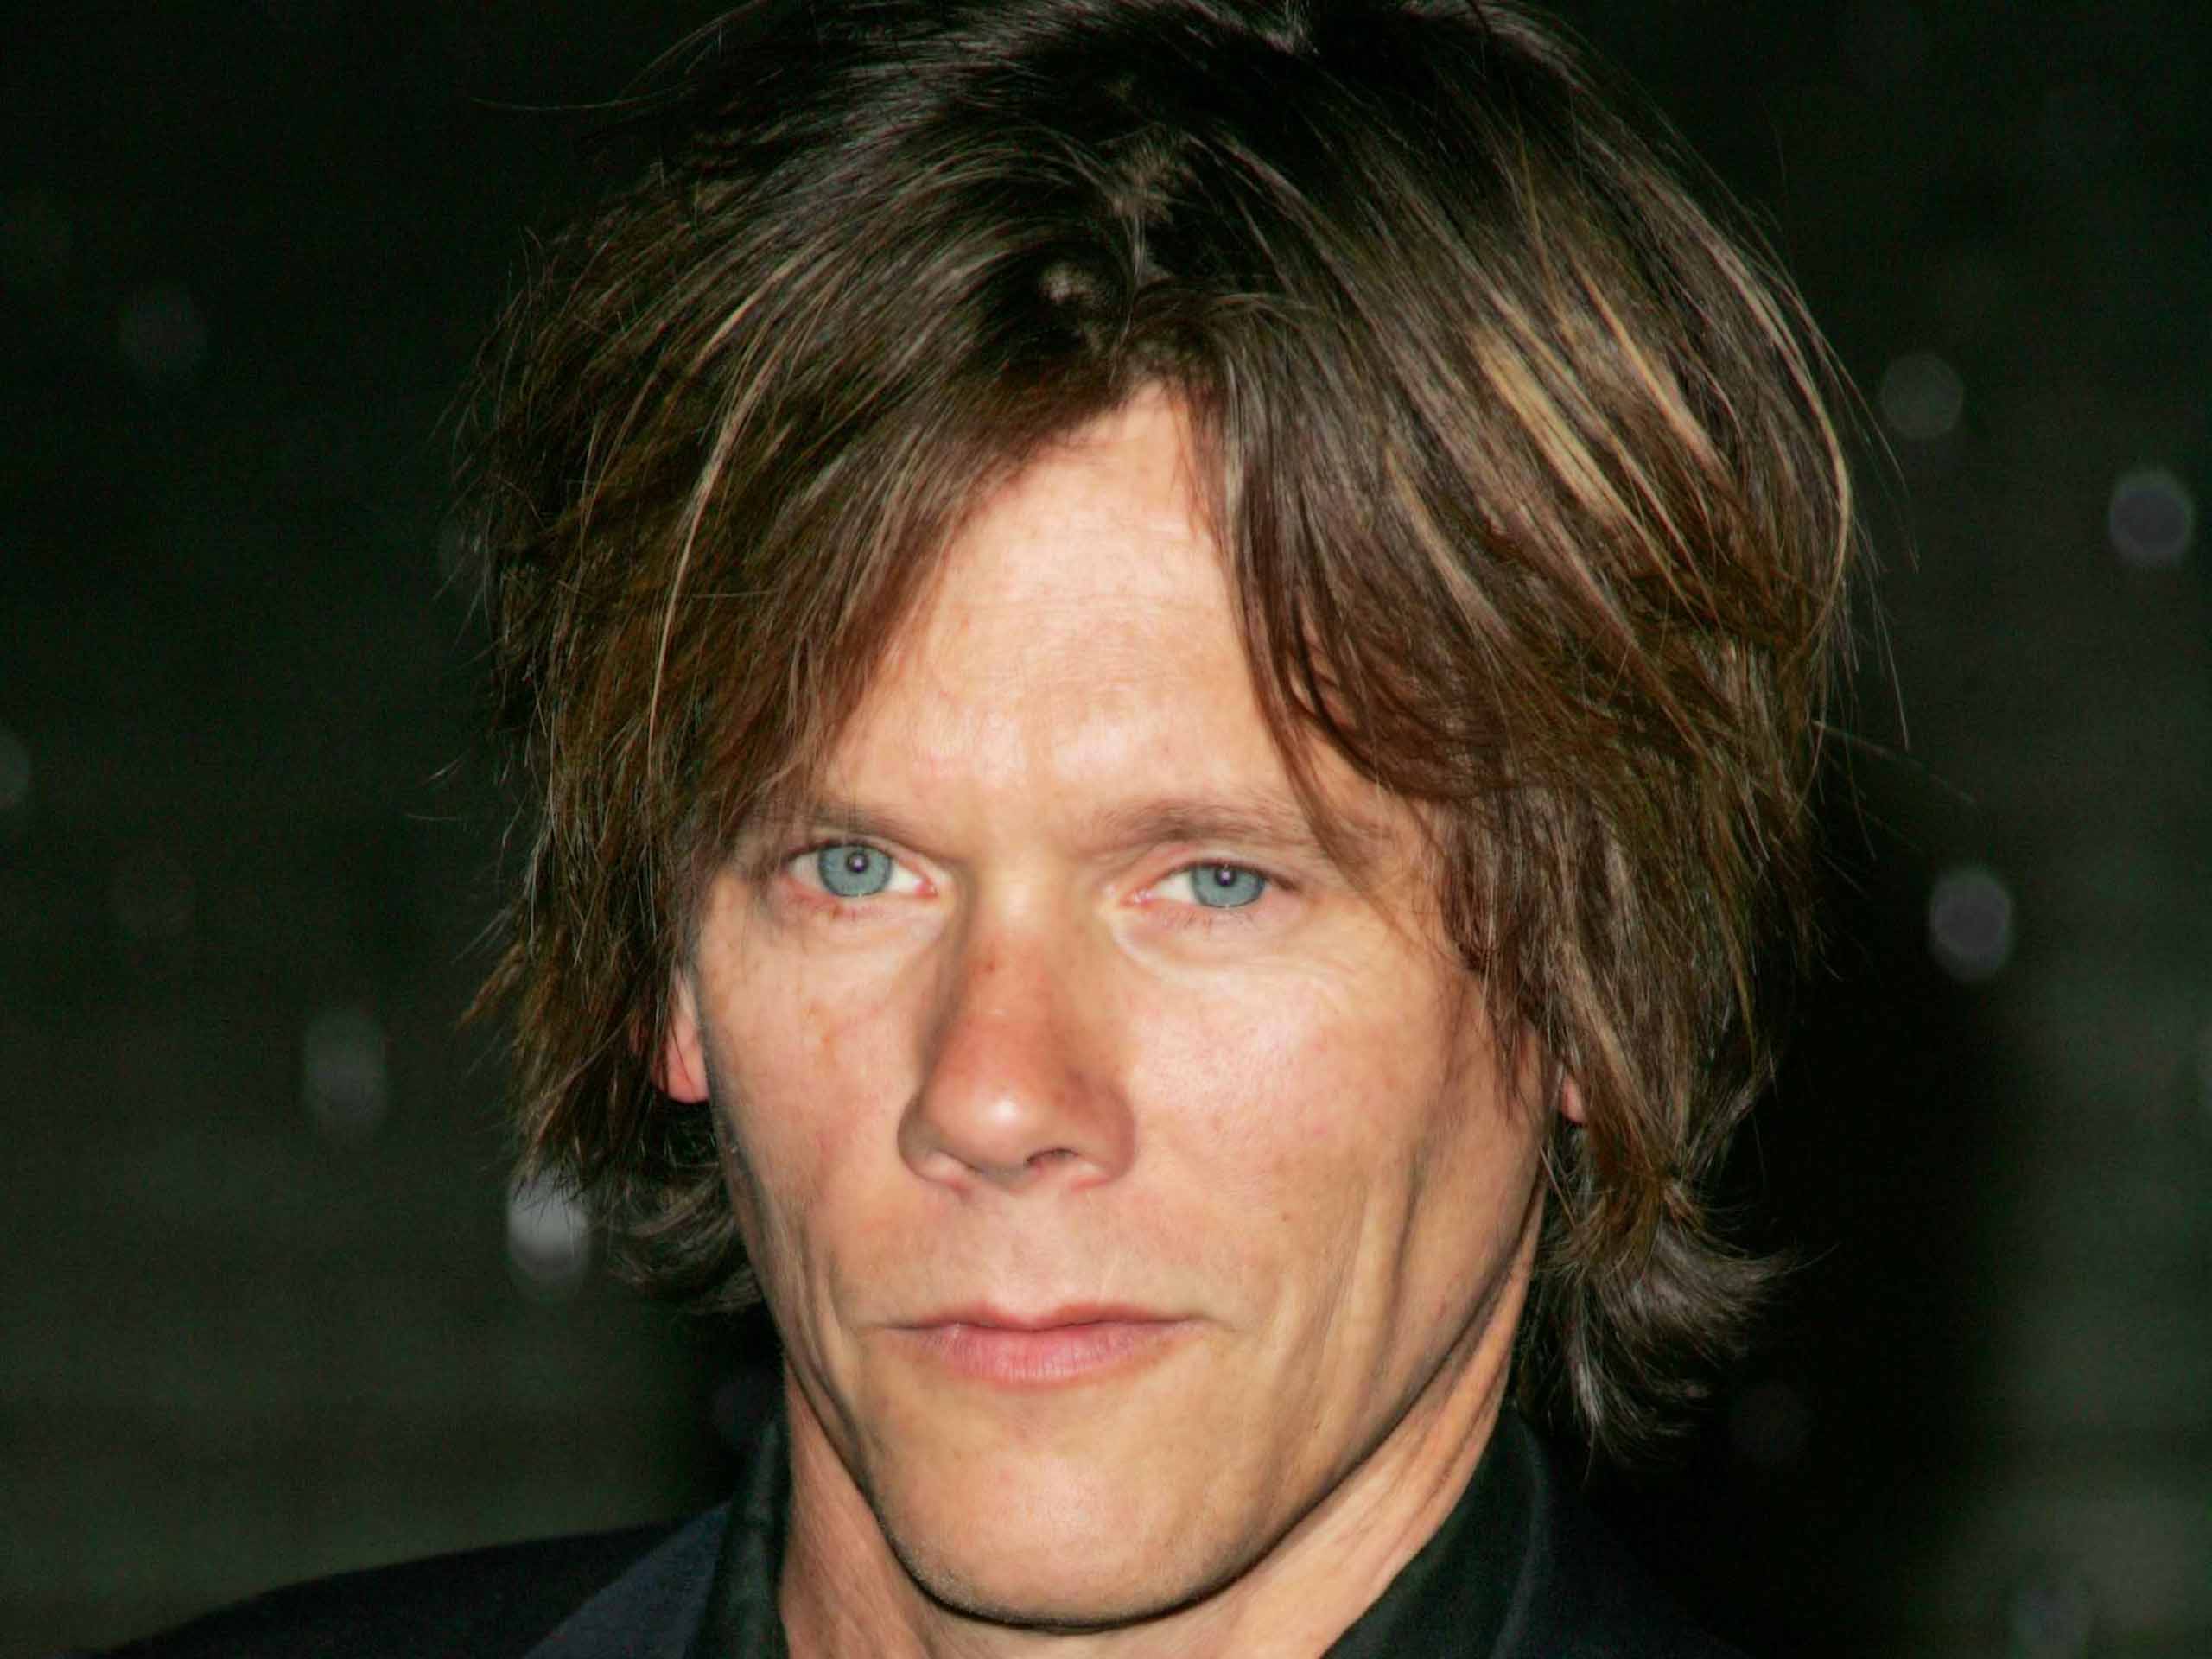 Kevin Bacon. Free Desktop Wallpaper for Widescreen, HD and Mobile